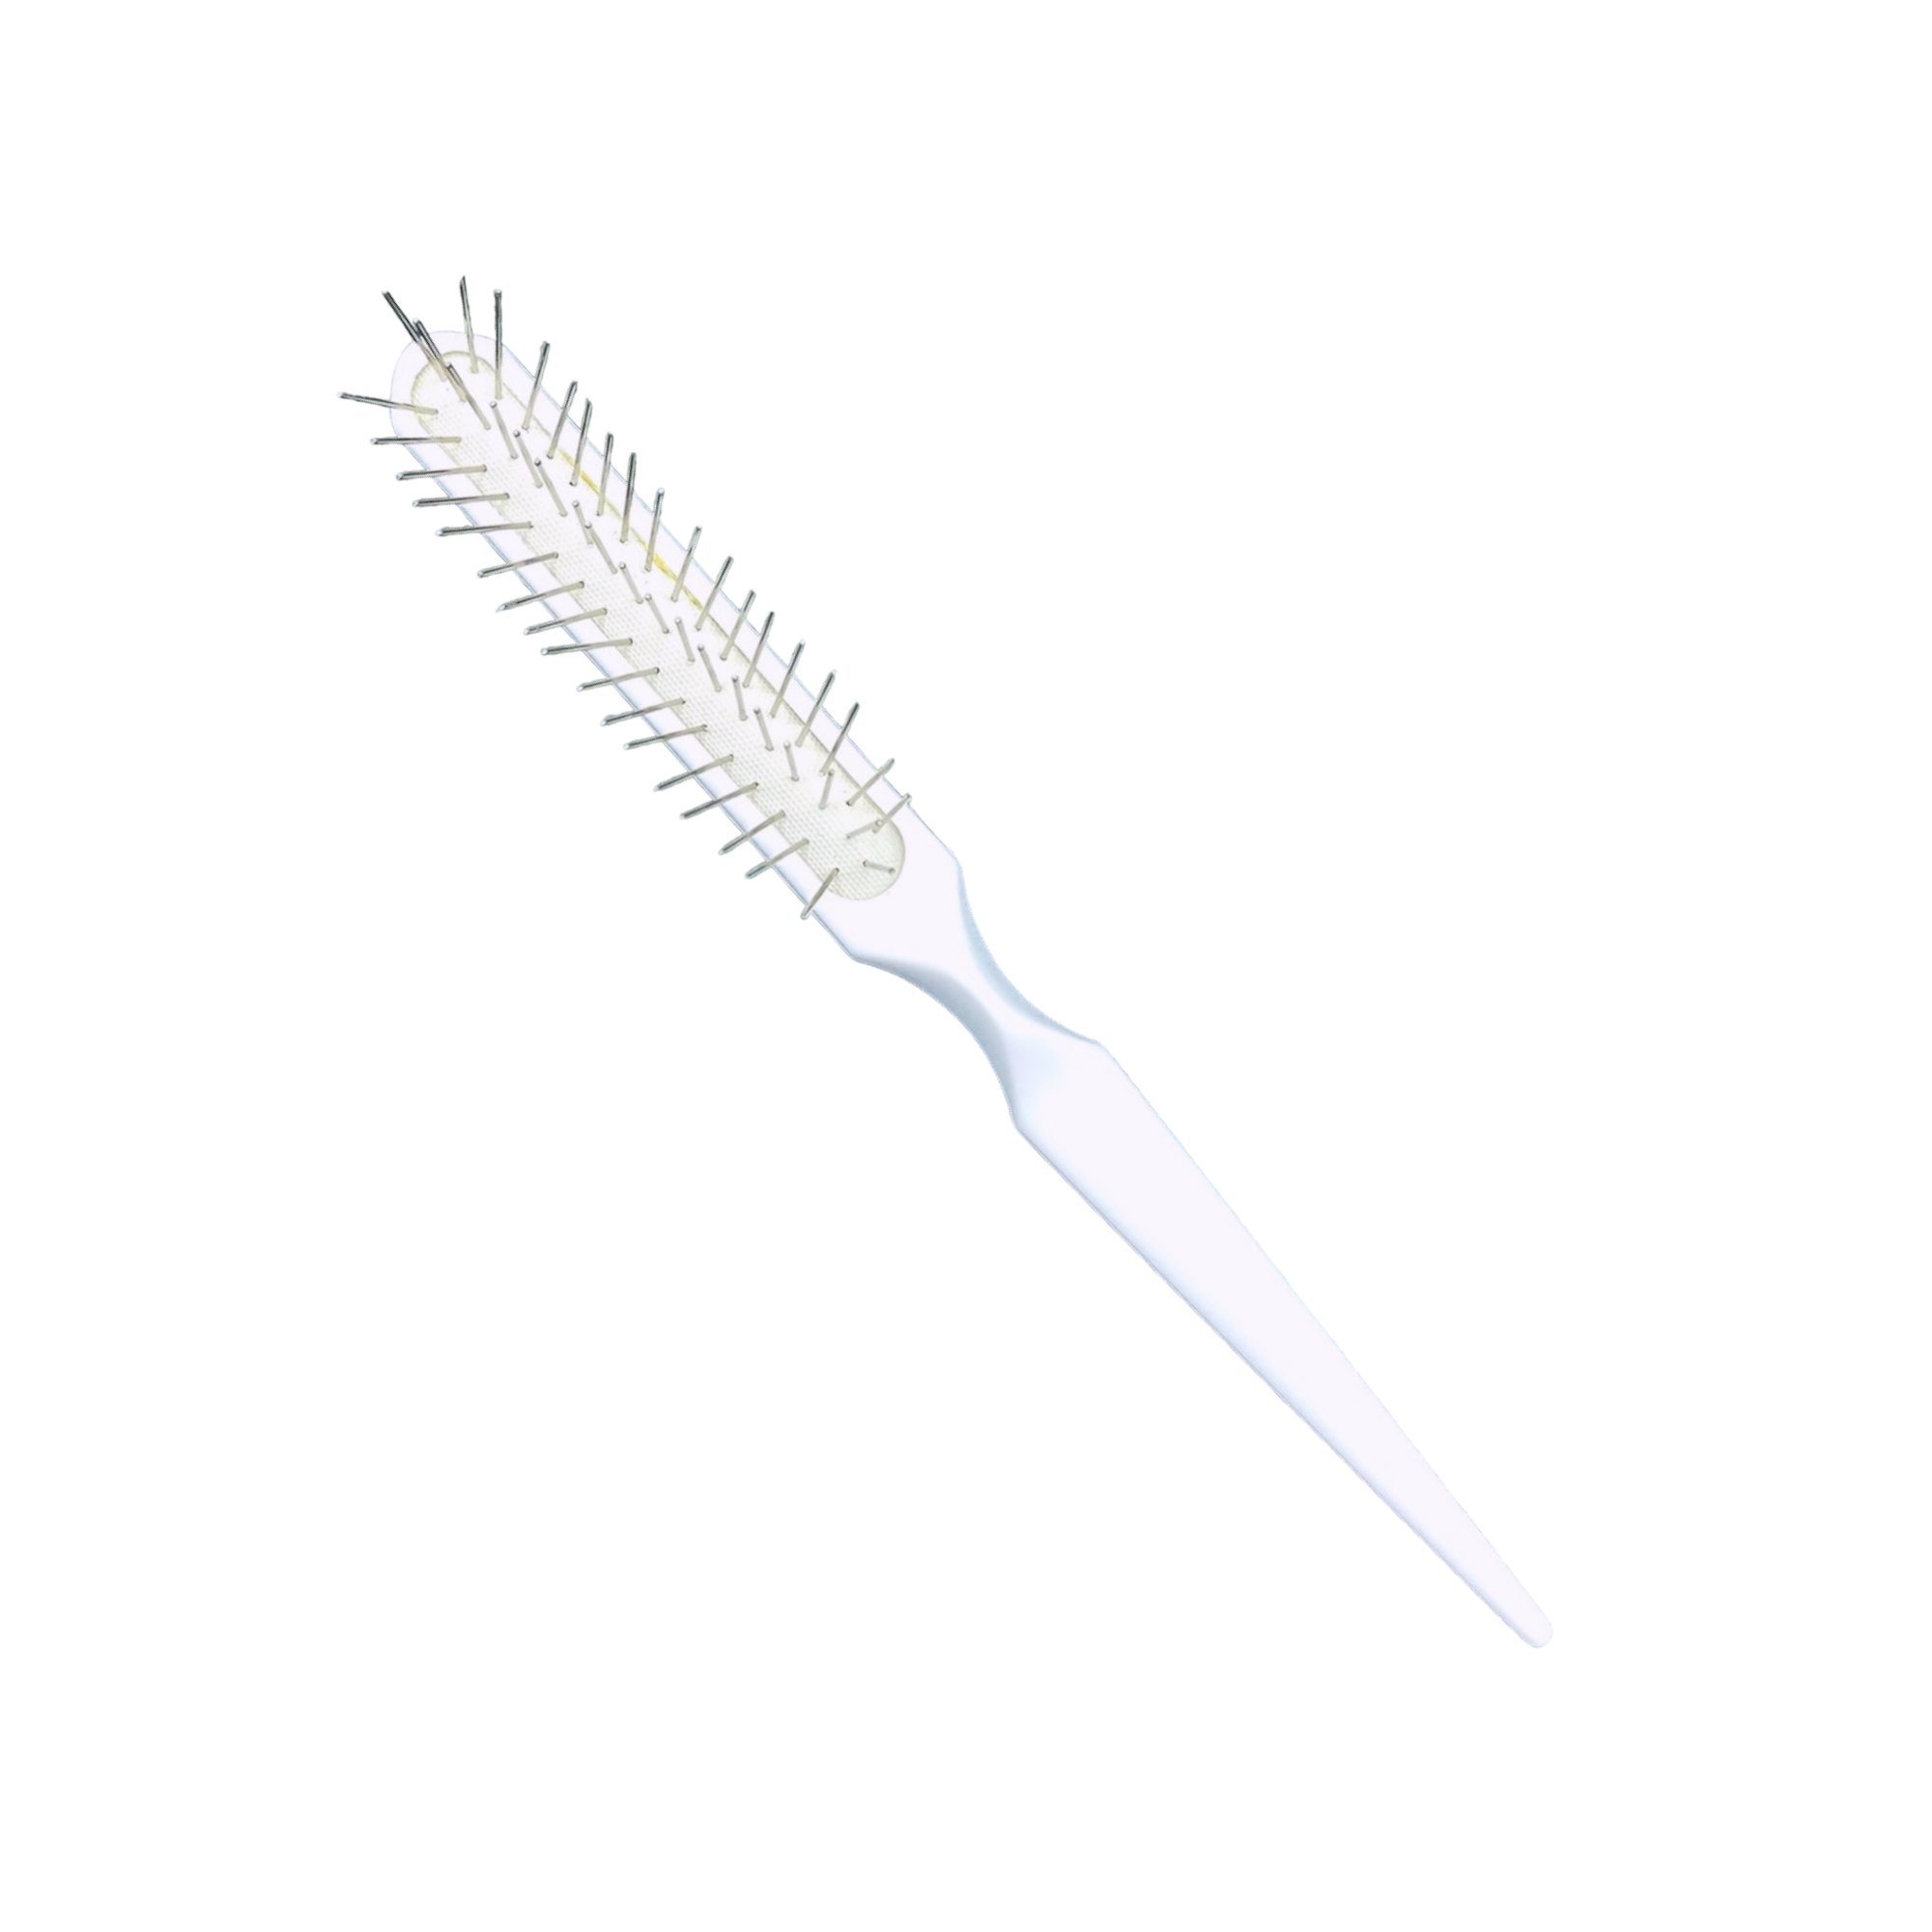 Dural back combing hair brush with steel pins